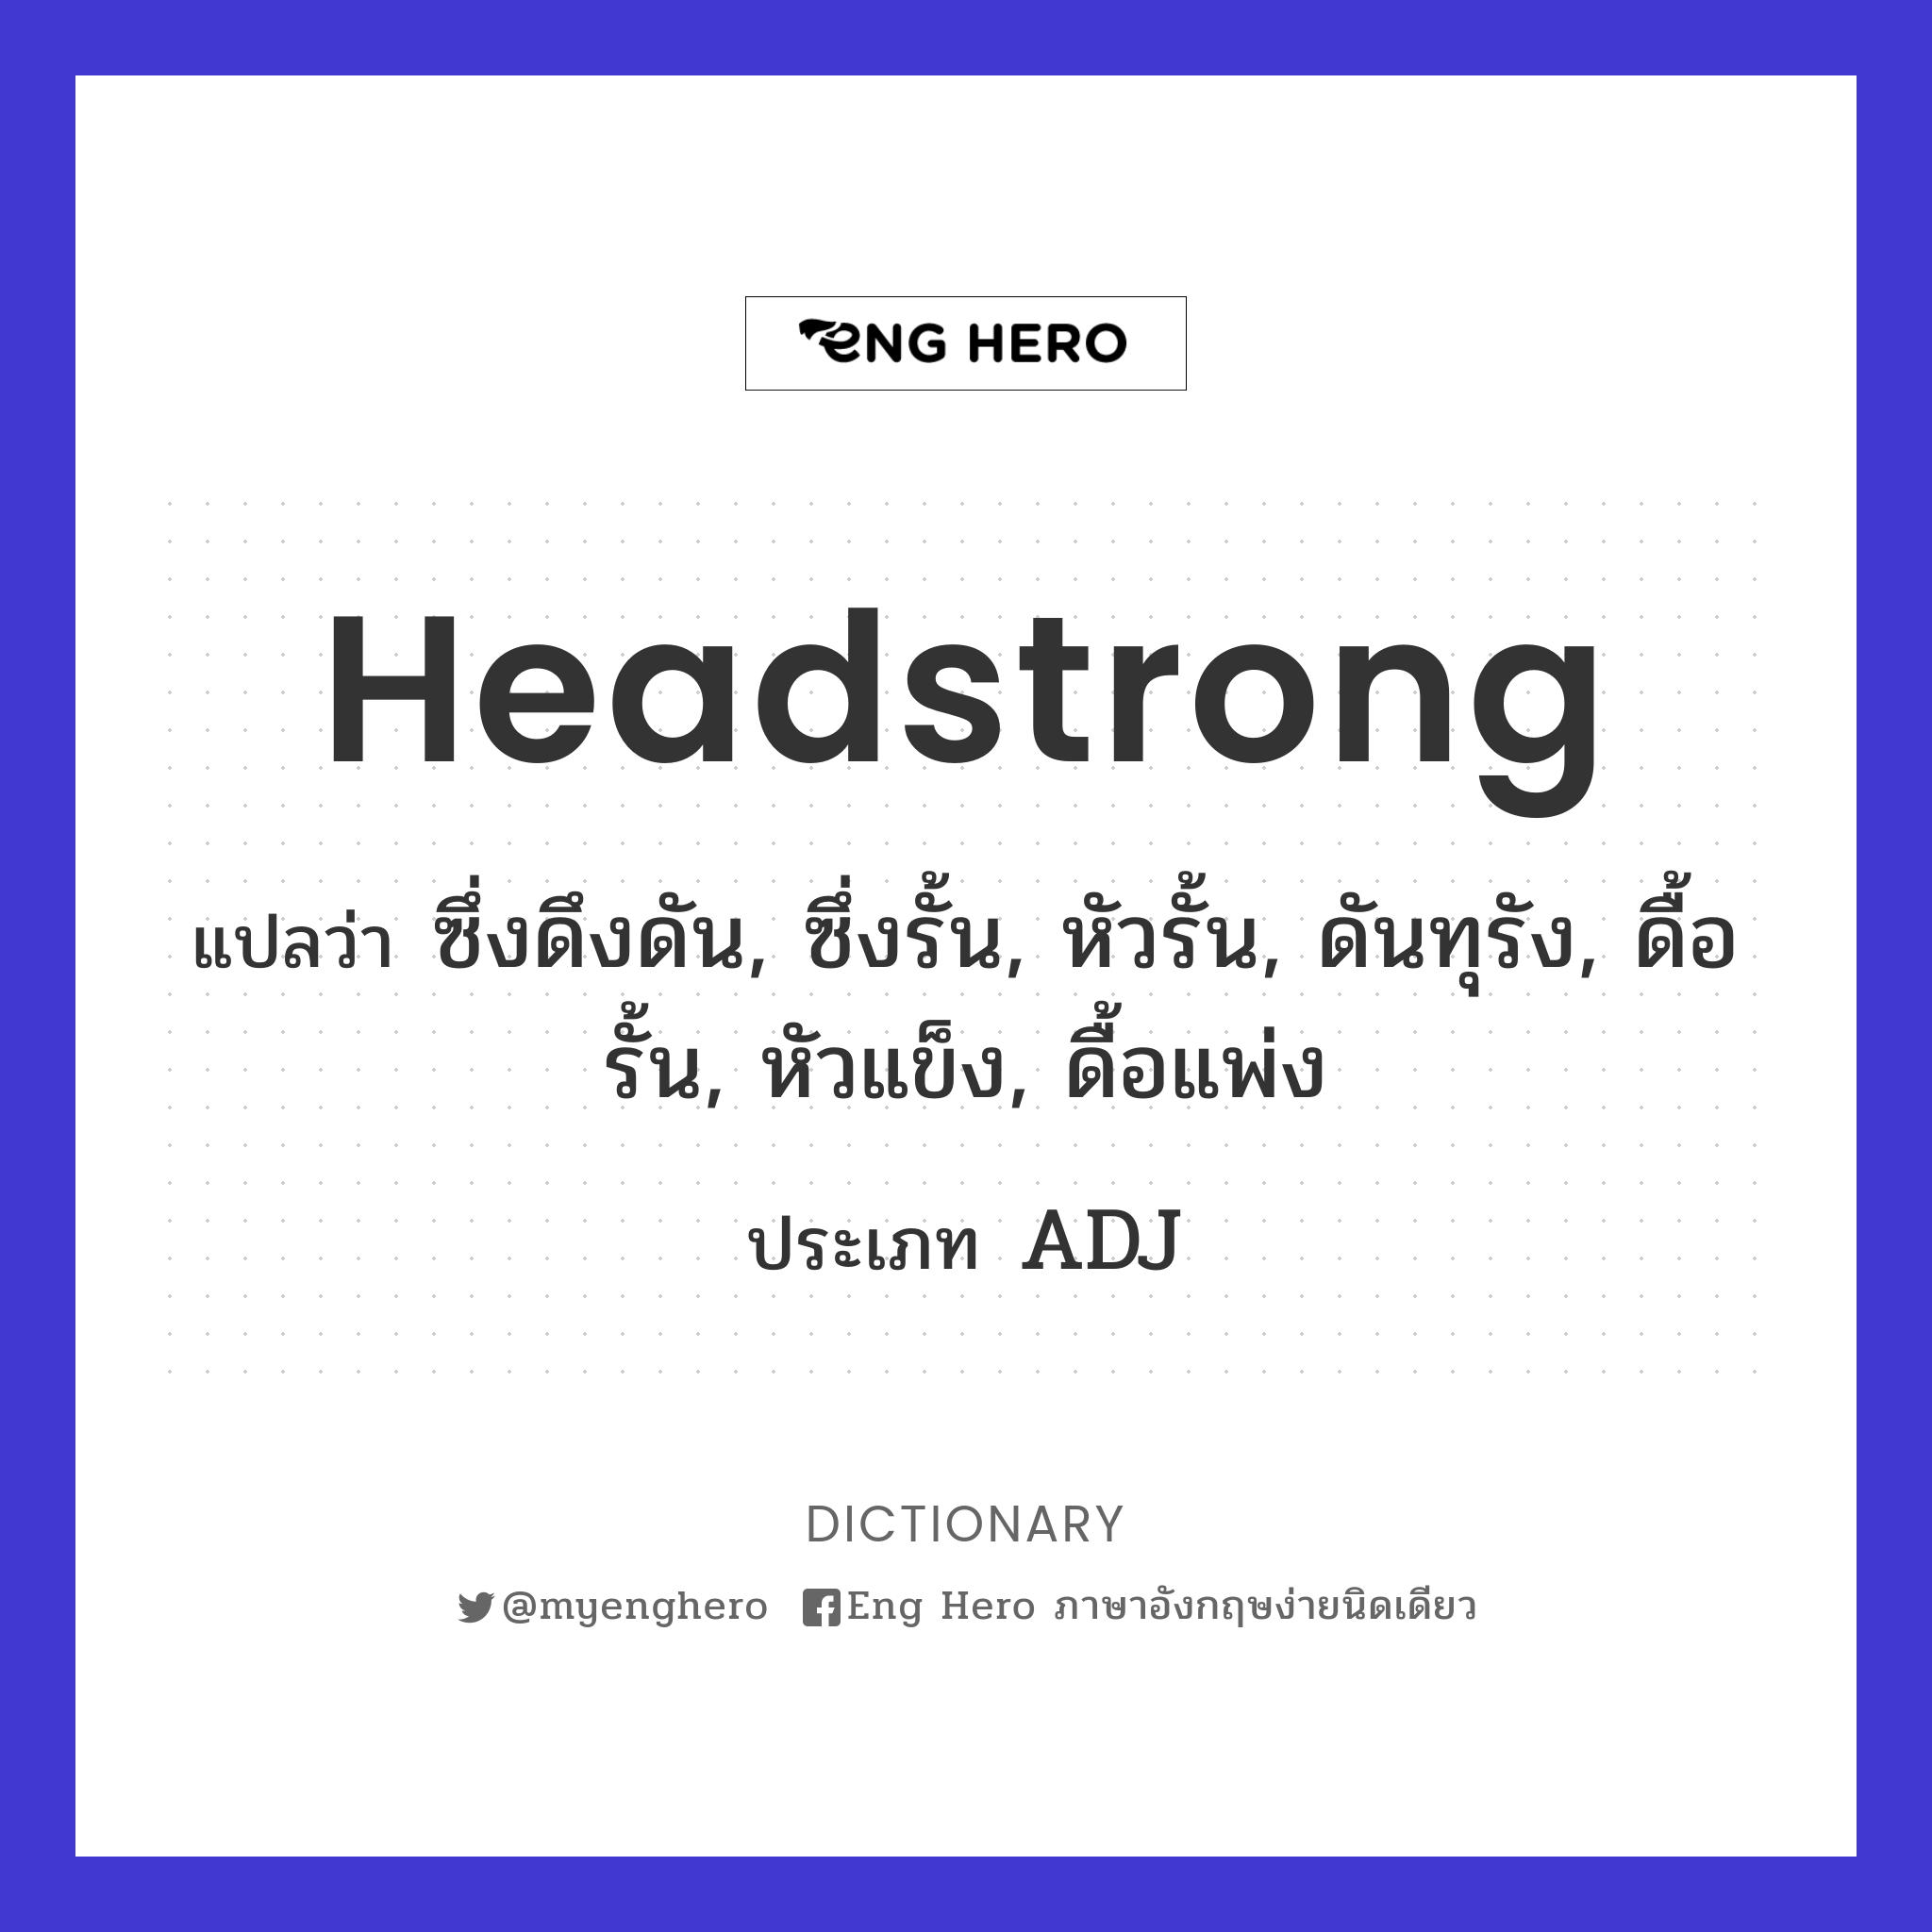 headstrong